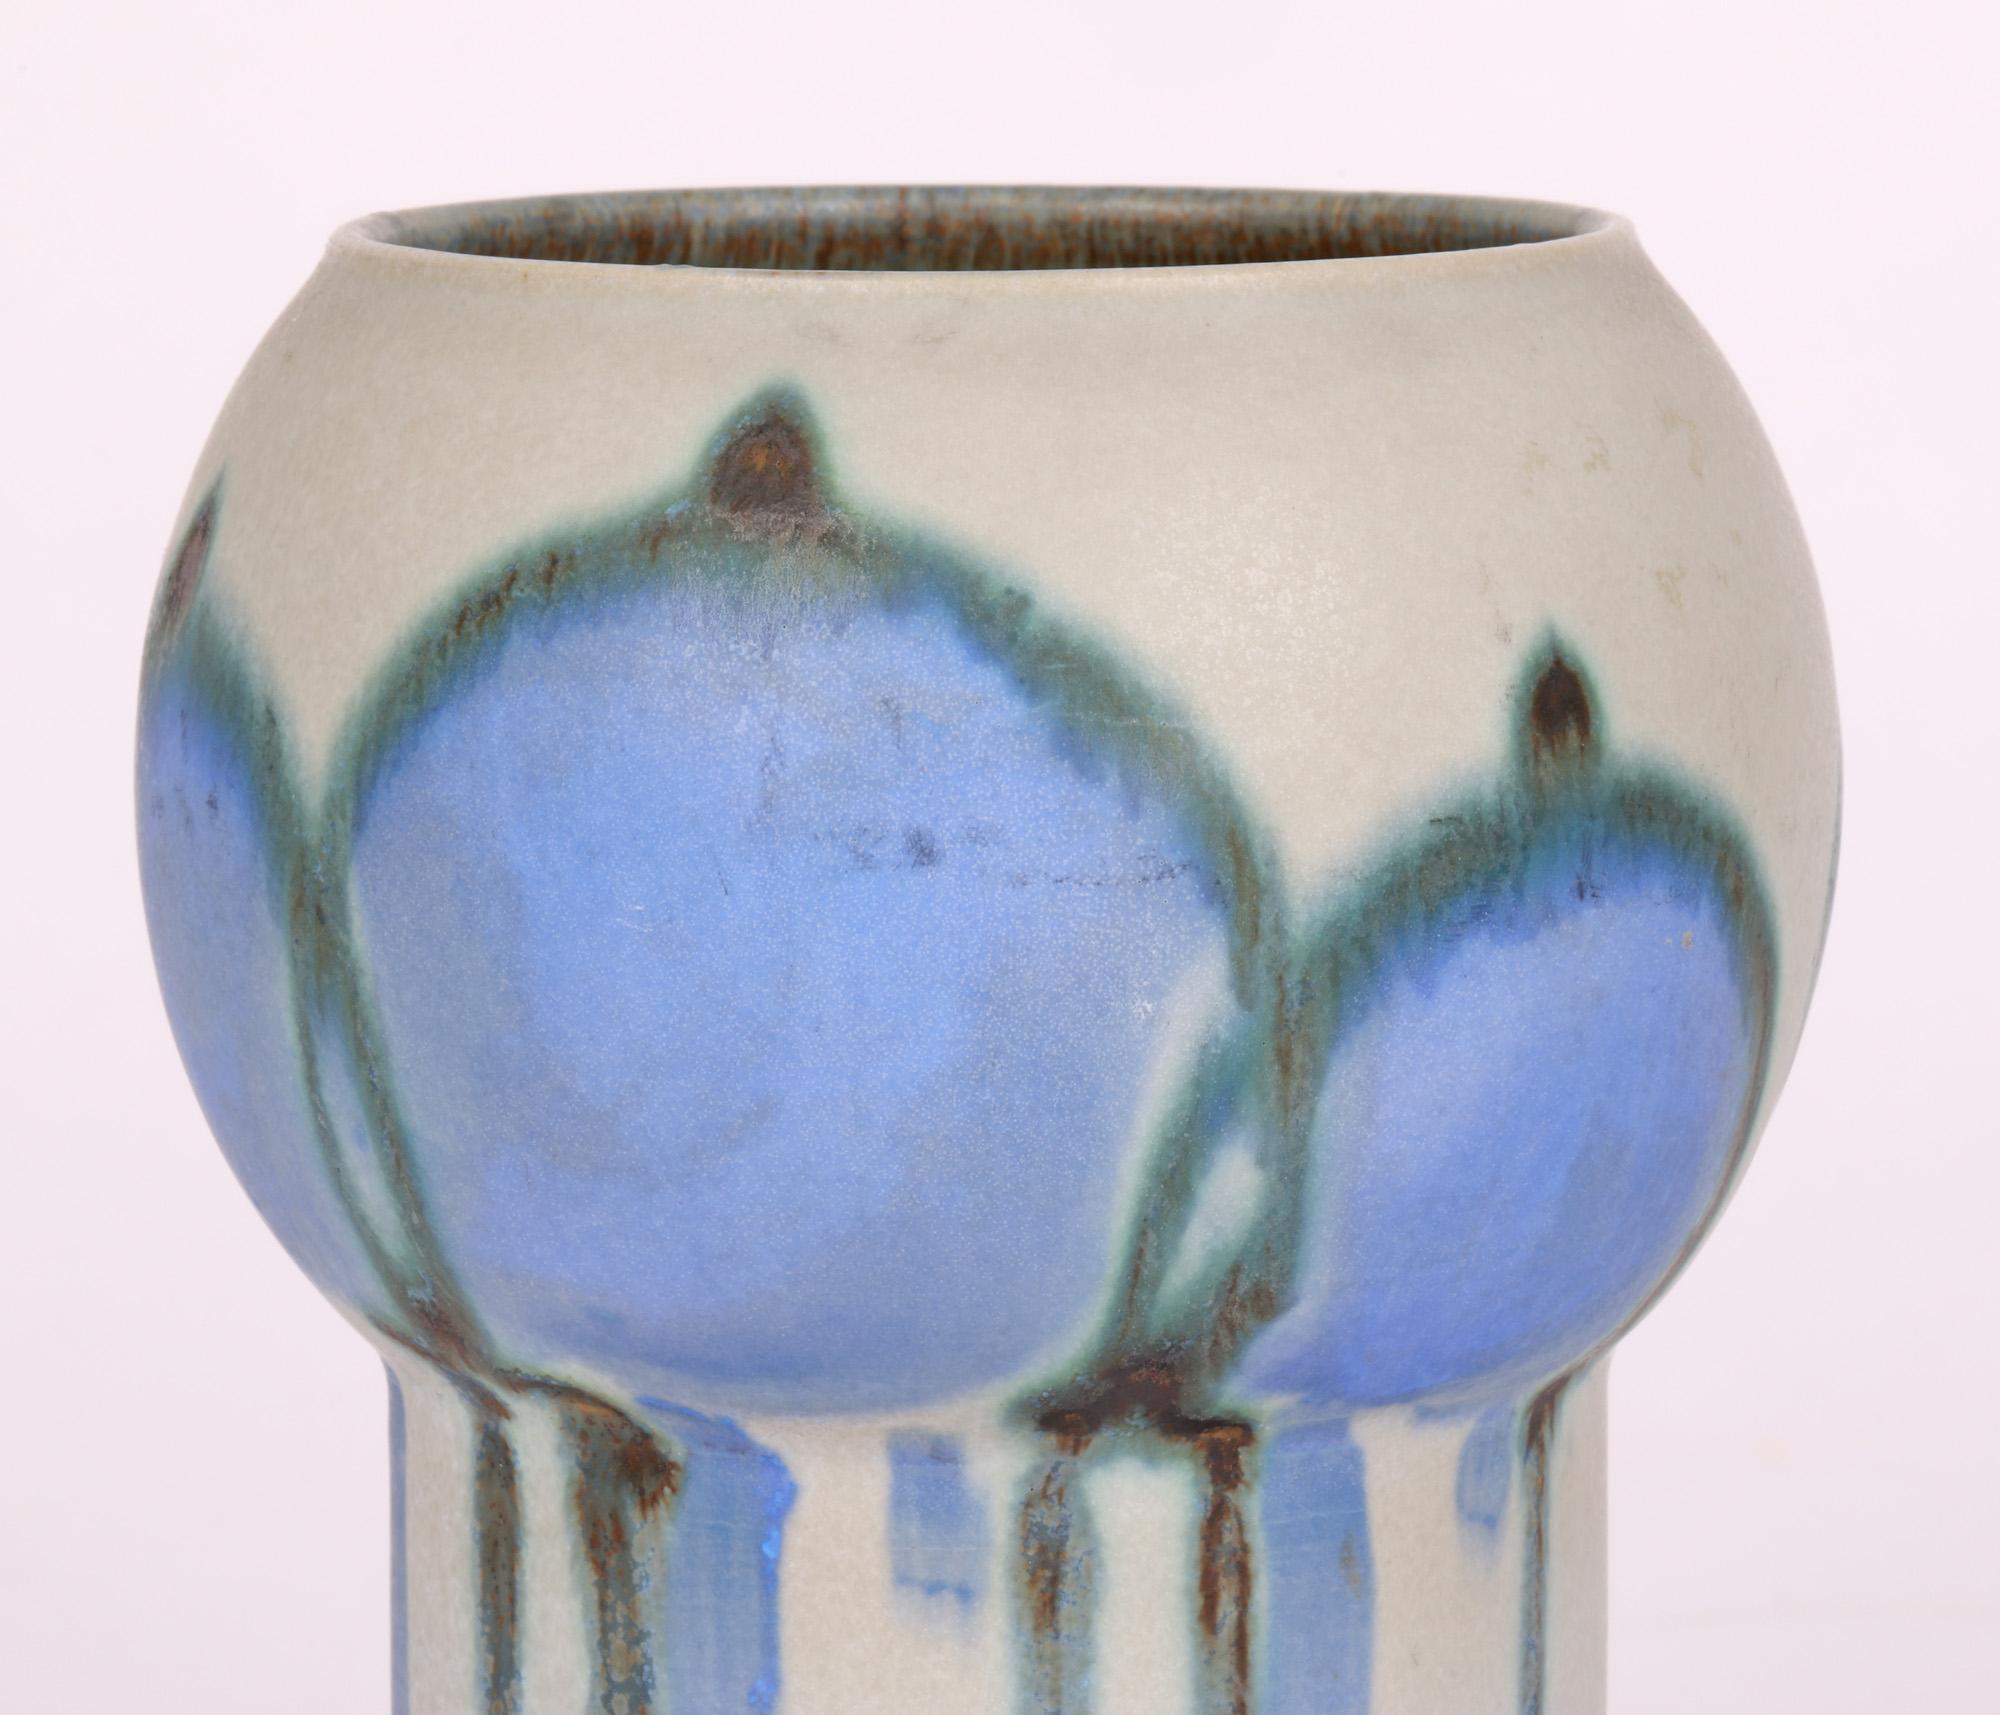 A very striking hand-made and hand decorated Swedish art pottery made by the Drejargruppen artist group for Rörstrand in 1973. The vase has a cylindrical shaped lower body with a wider round shaped top and is hand decorated with a pettern emulating